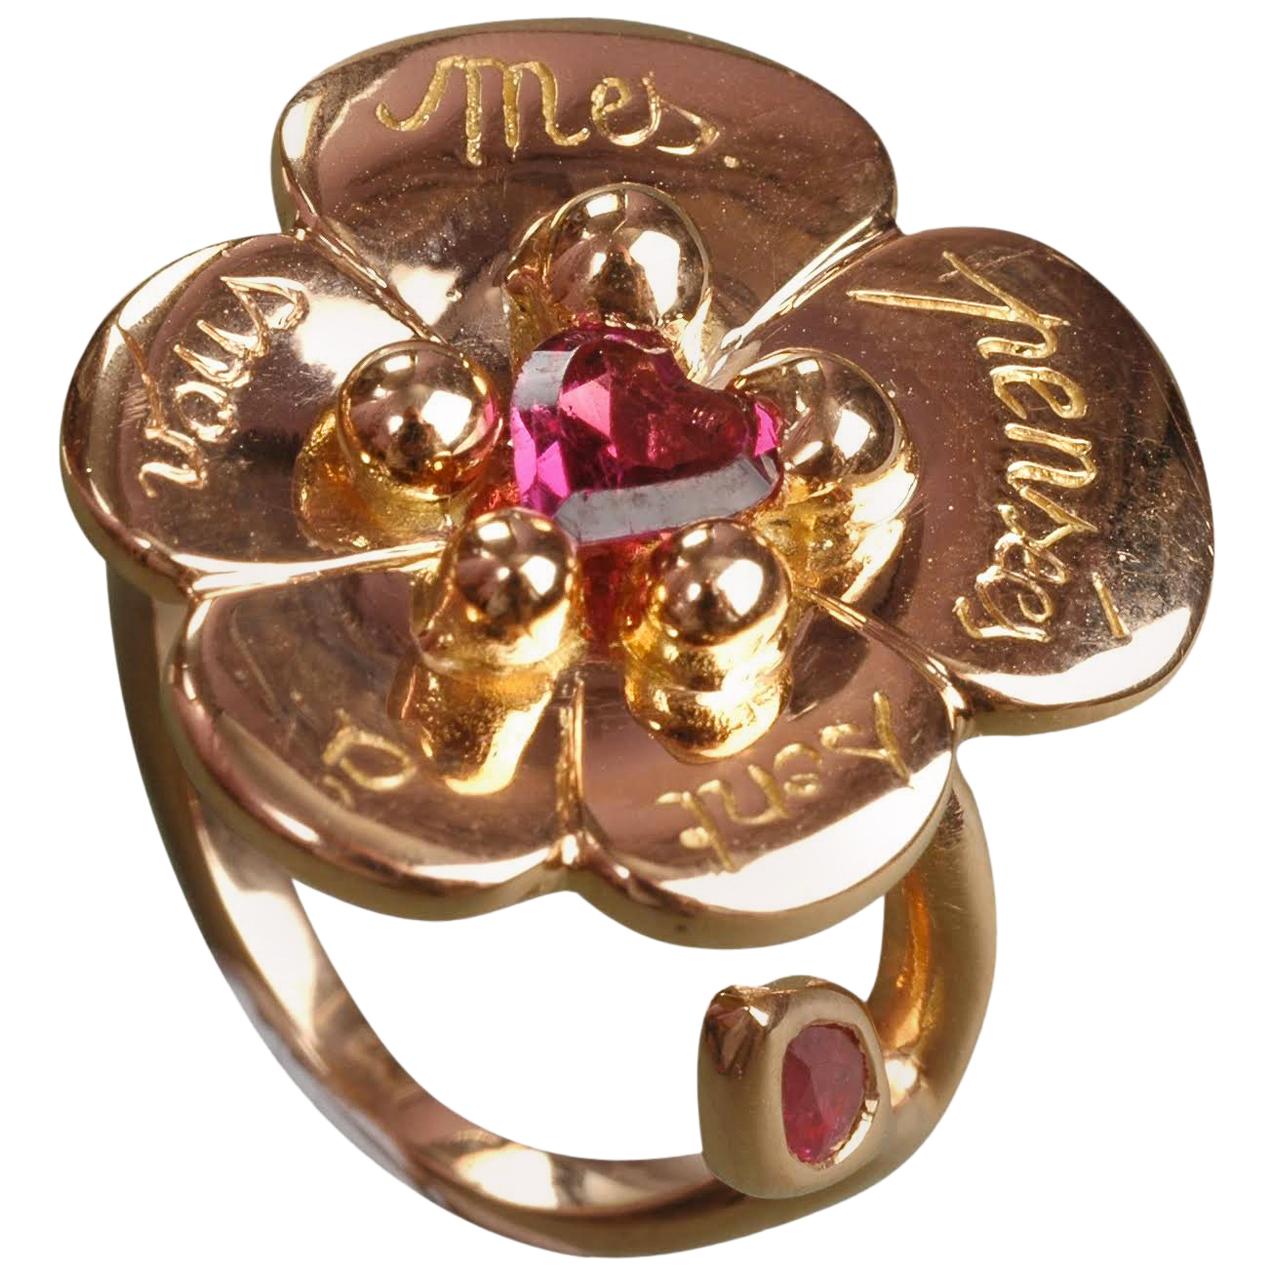 Sylvie Corbelin Limited Edition of an 18K Gold Pansy Ring with Rodholite Garnet For Sale